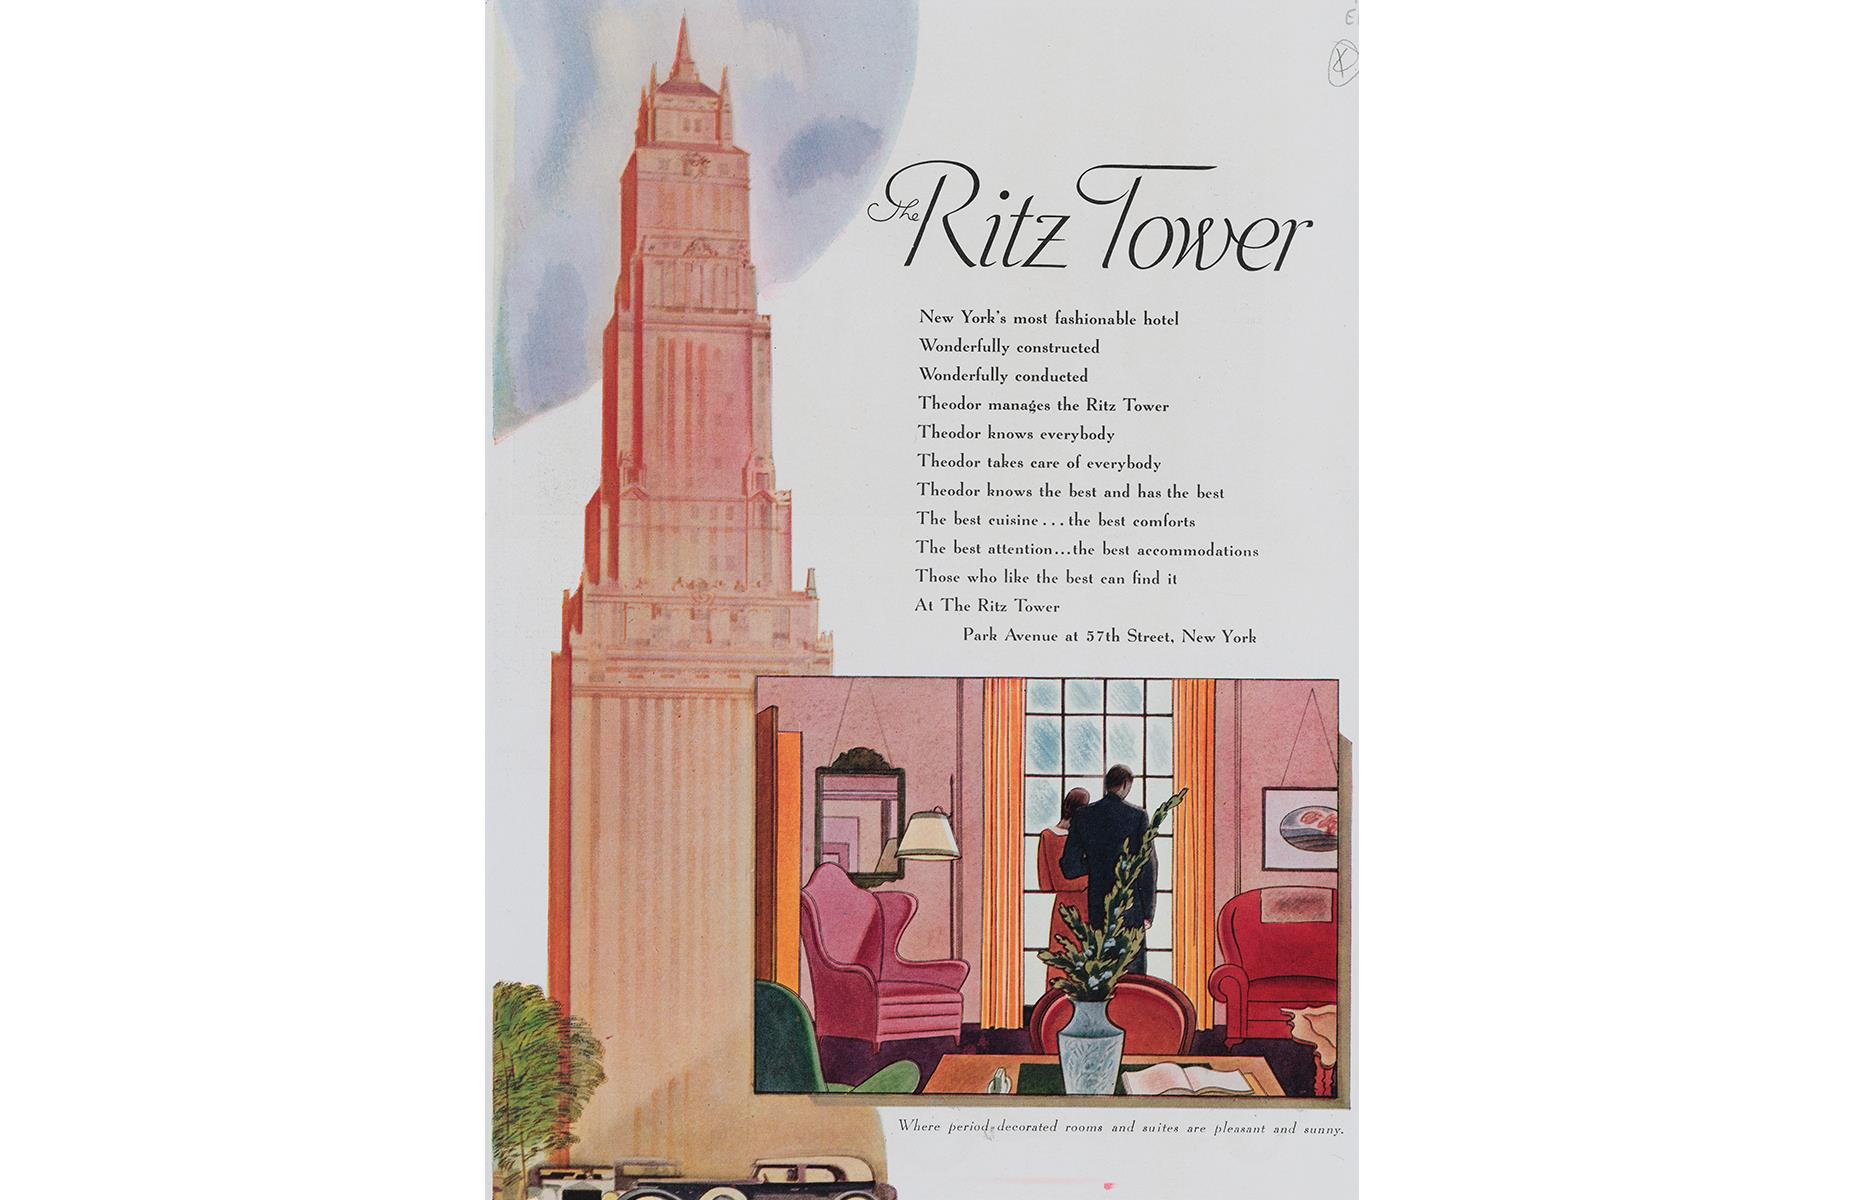 The Big Apple is packed tight with glamorous hotels, from Beaux-Arts masterpieces to Art Deco marvels. This elegant 1930s ad celebrates the Ritz Tower, built on New York's Park Avenue in the 1920s. The poster praises the impeccable architecture, incredible home comforts and quality service.